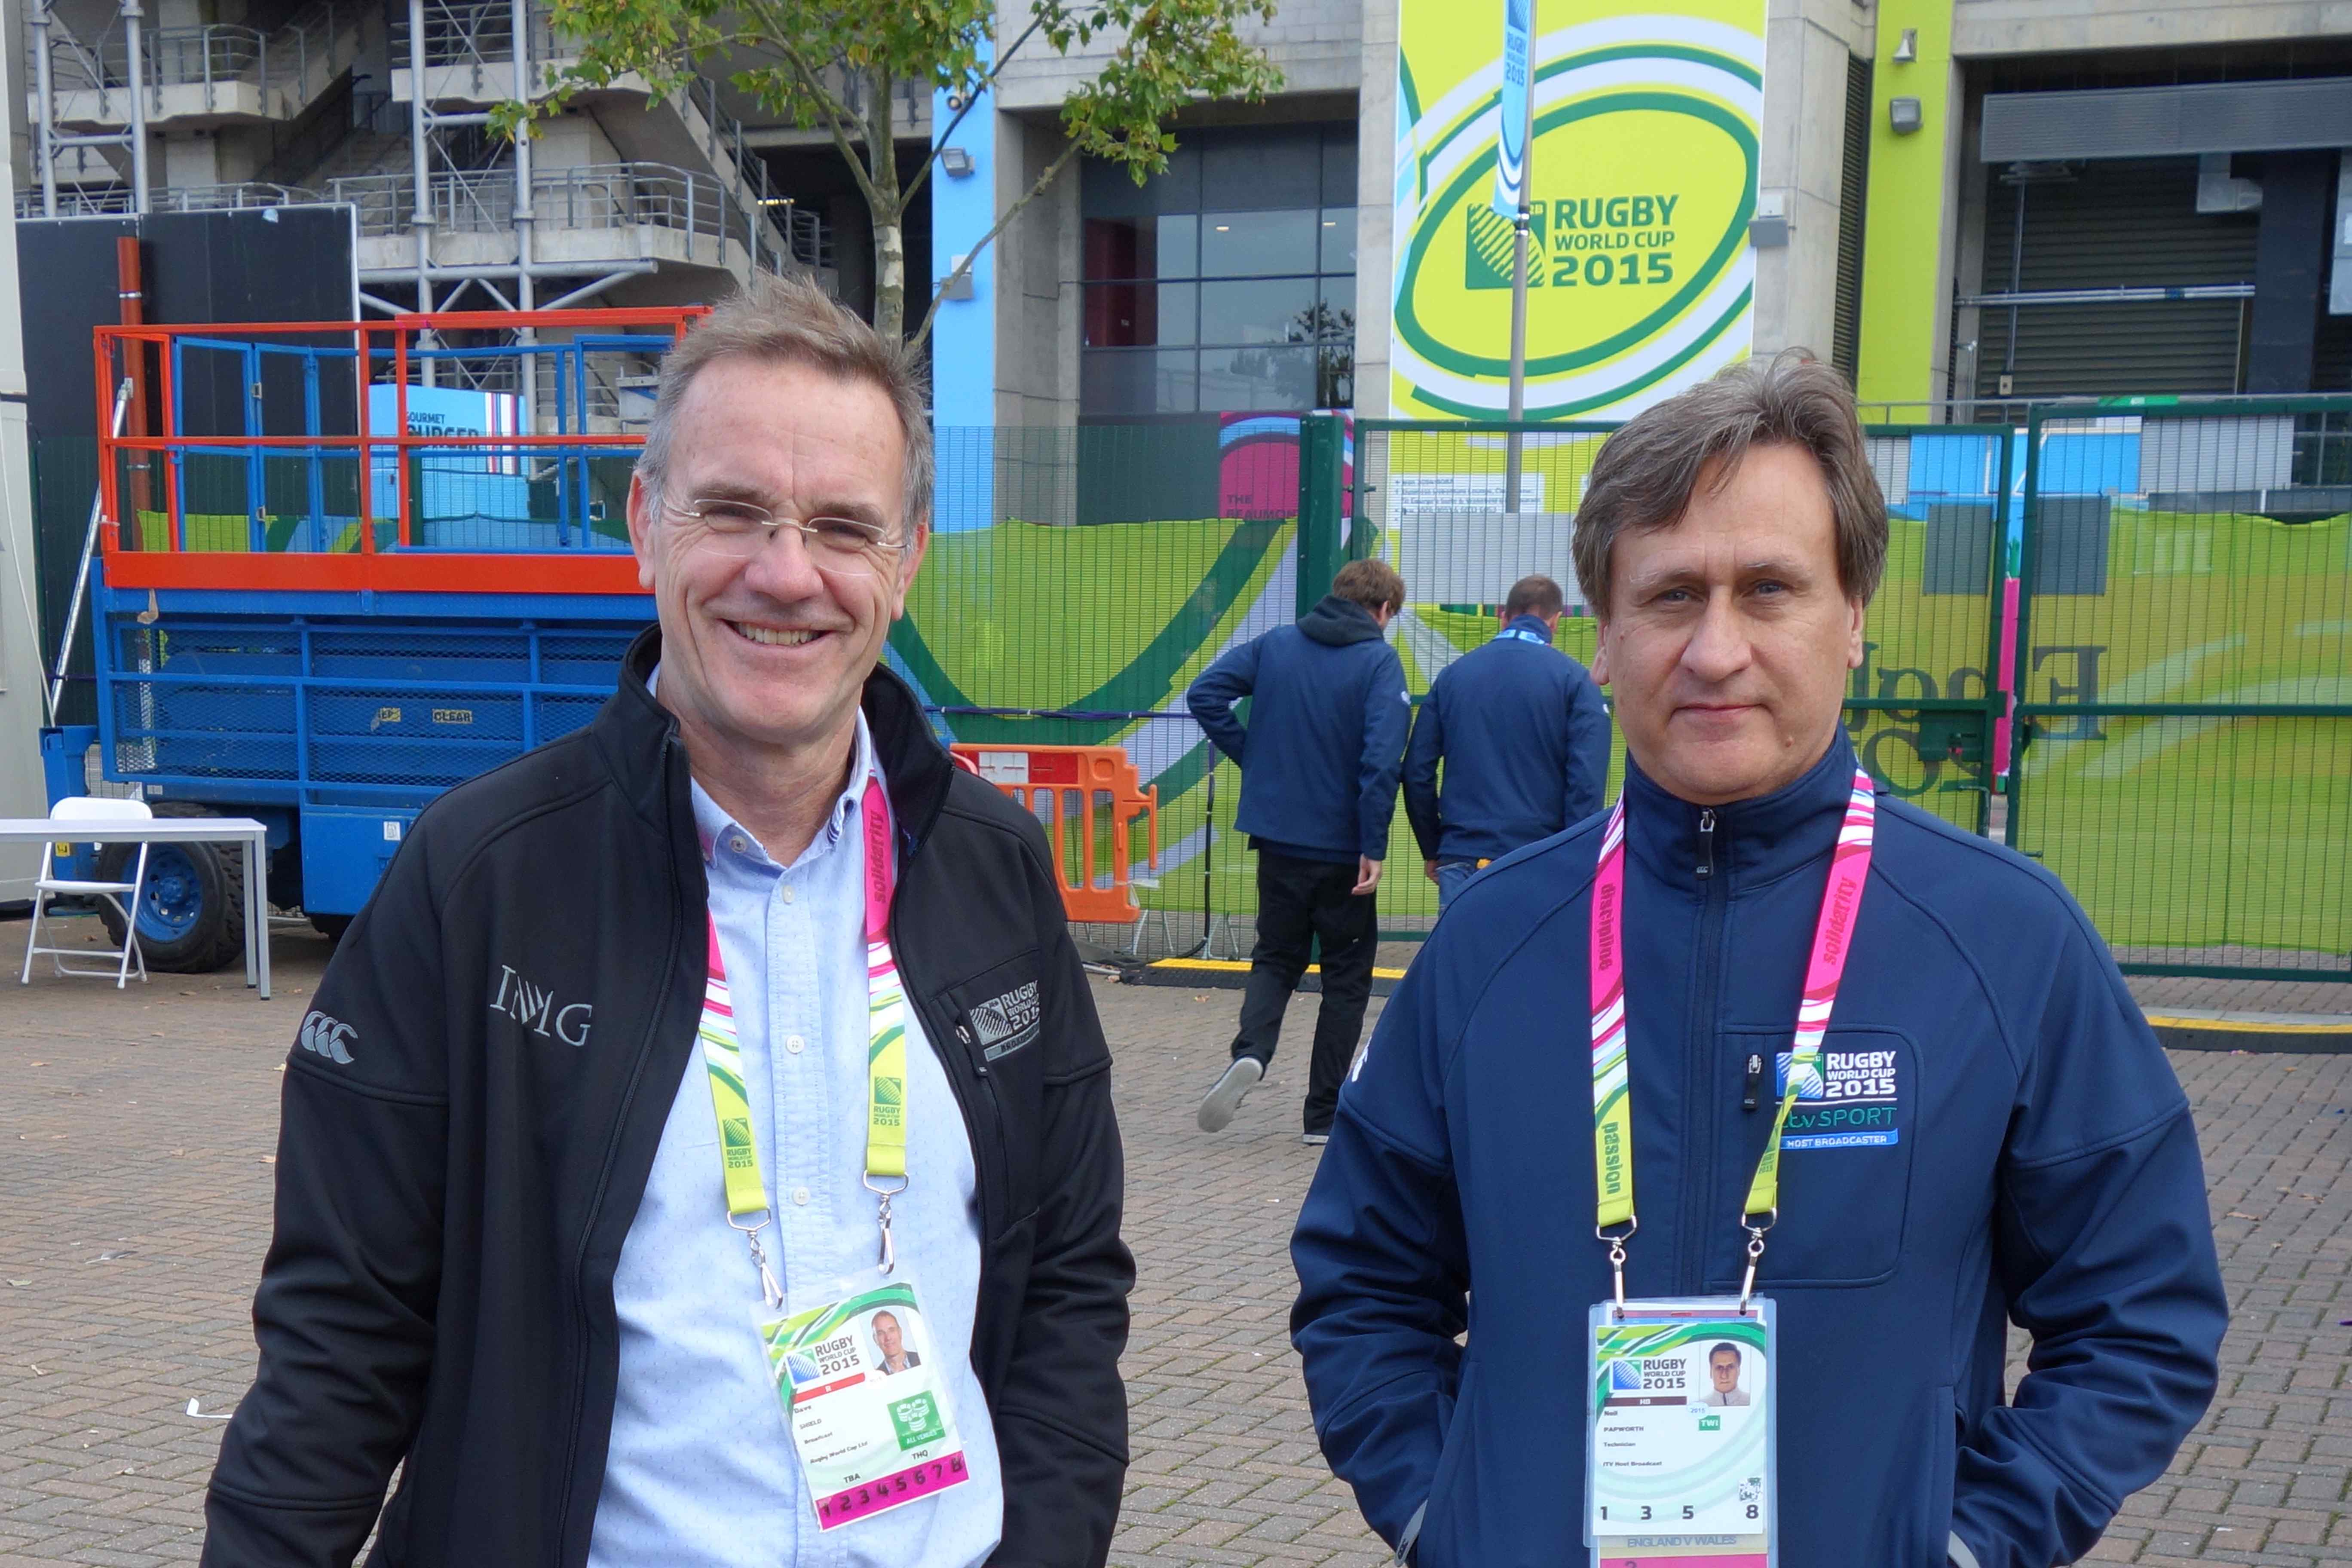 Live from Rugby World Cup ITV, IMG and contractors deliver Host Broadcast operation